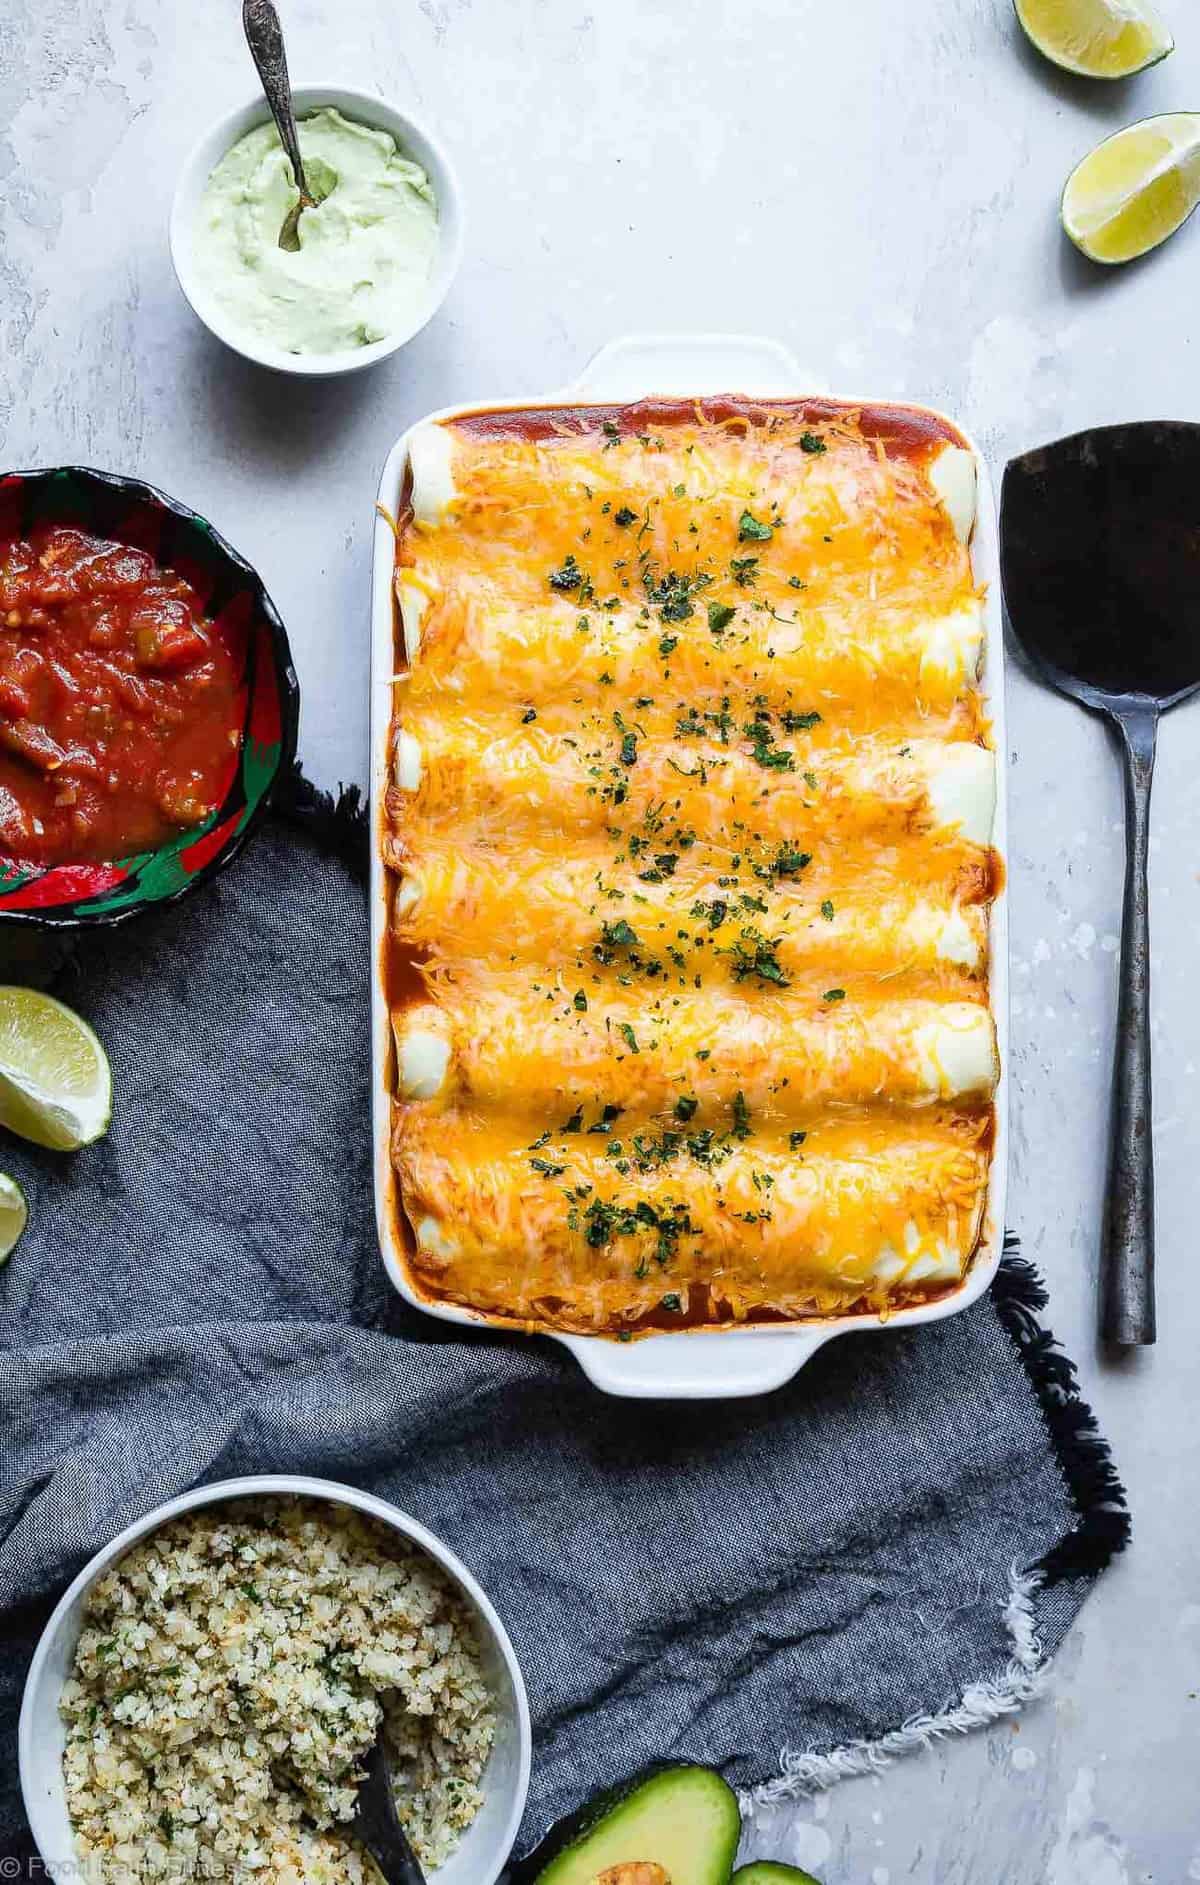 Healthy Low Carb Chicken Enchiladas - This gluten free Healthy Low Carb Chicken Enchilada Recipe uses a secret ingredient to make it low carb, protein PACKED and under 500 calories for a HUGE serving! These do NOT taste healthy and even picky eaters love them! | #Foodfaithfitness | #Lowcarb #Glutenfree #Healthy #Grainfree #Enchiladas 